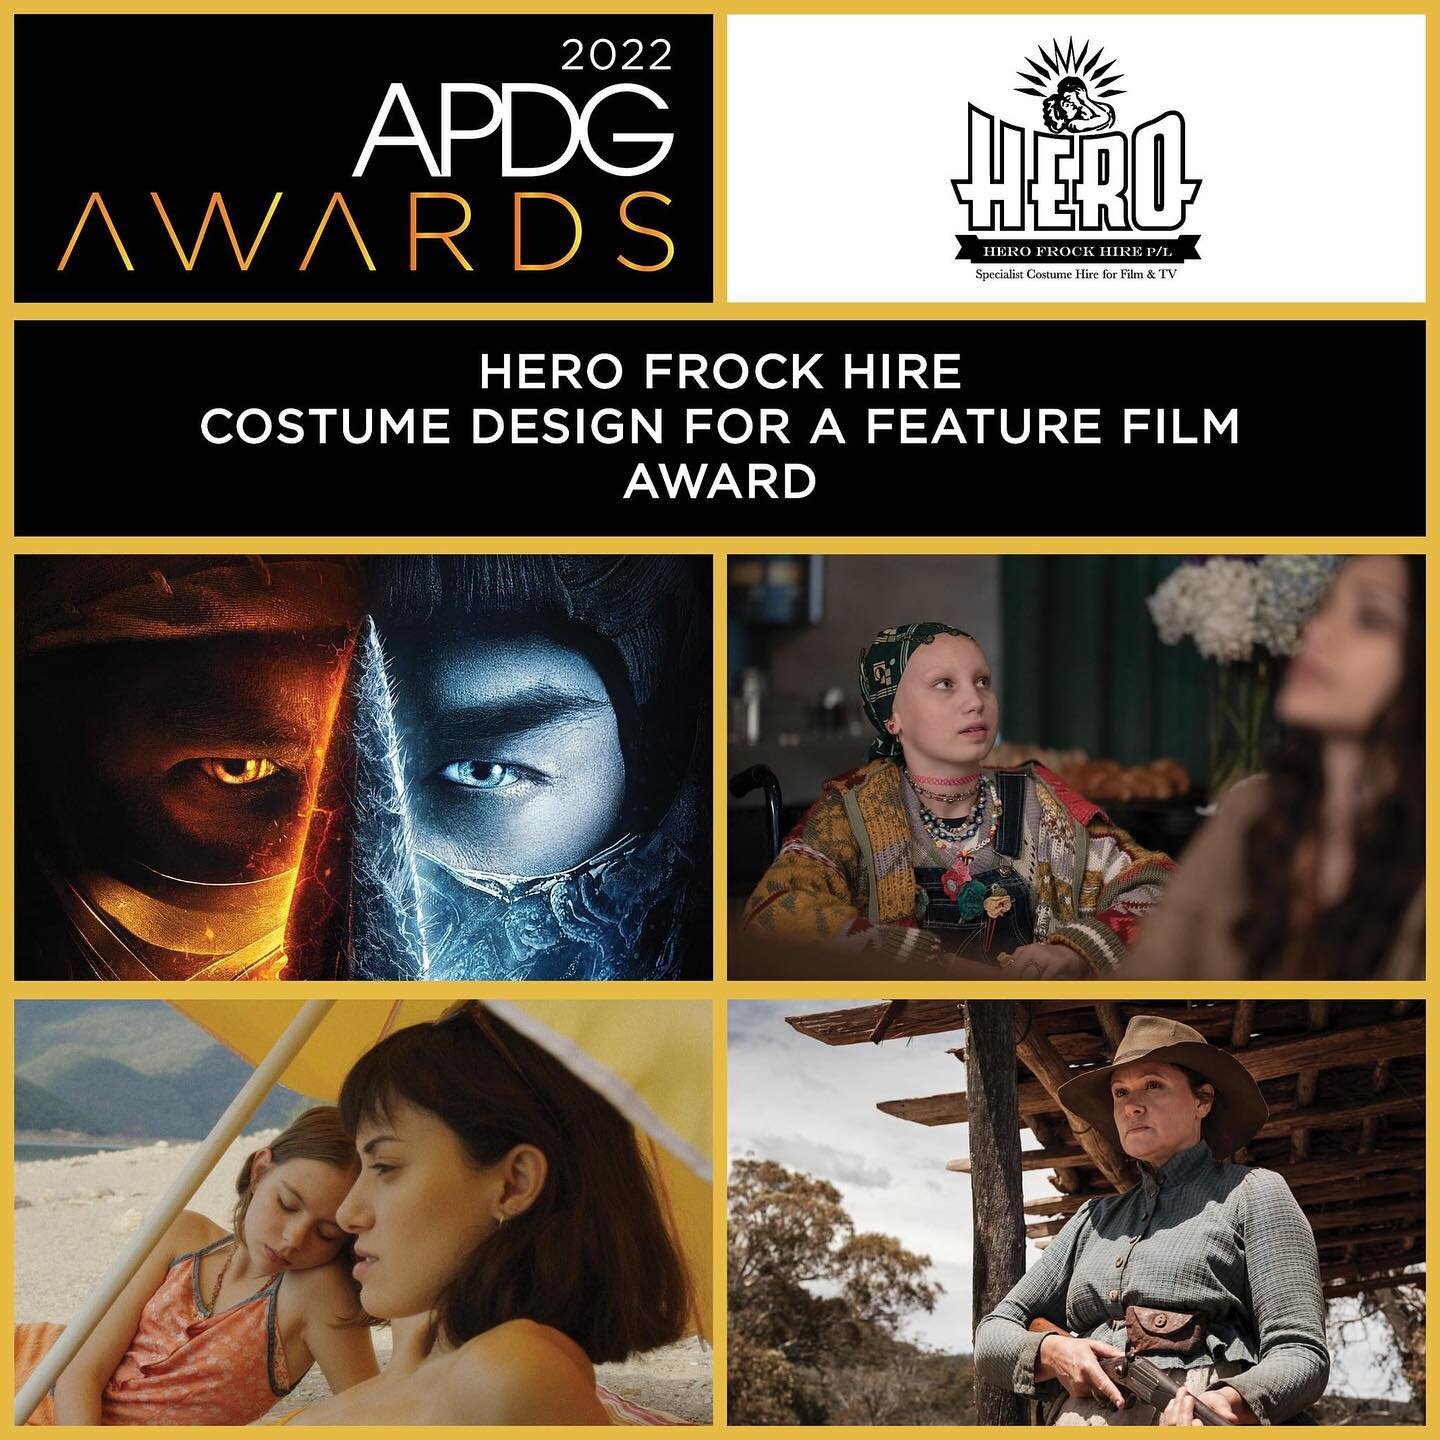 Thank you @apdguild and to all my A team costume peeps  for the noms ✨✨✨
#apdgawards #costumedesign #periodcostume #fantasycostume #mortalkombatmovie #newgoldmountain 
@sbsondemand